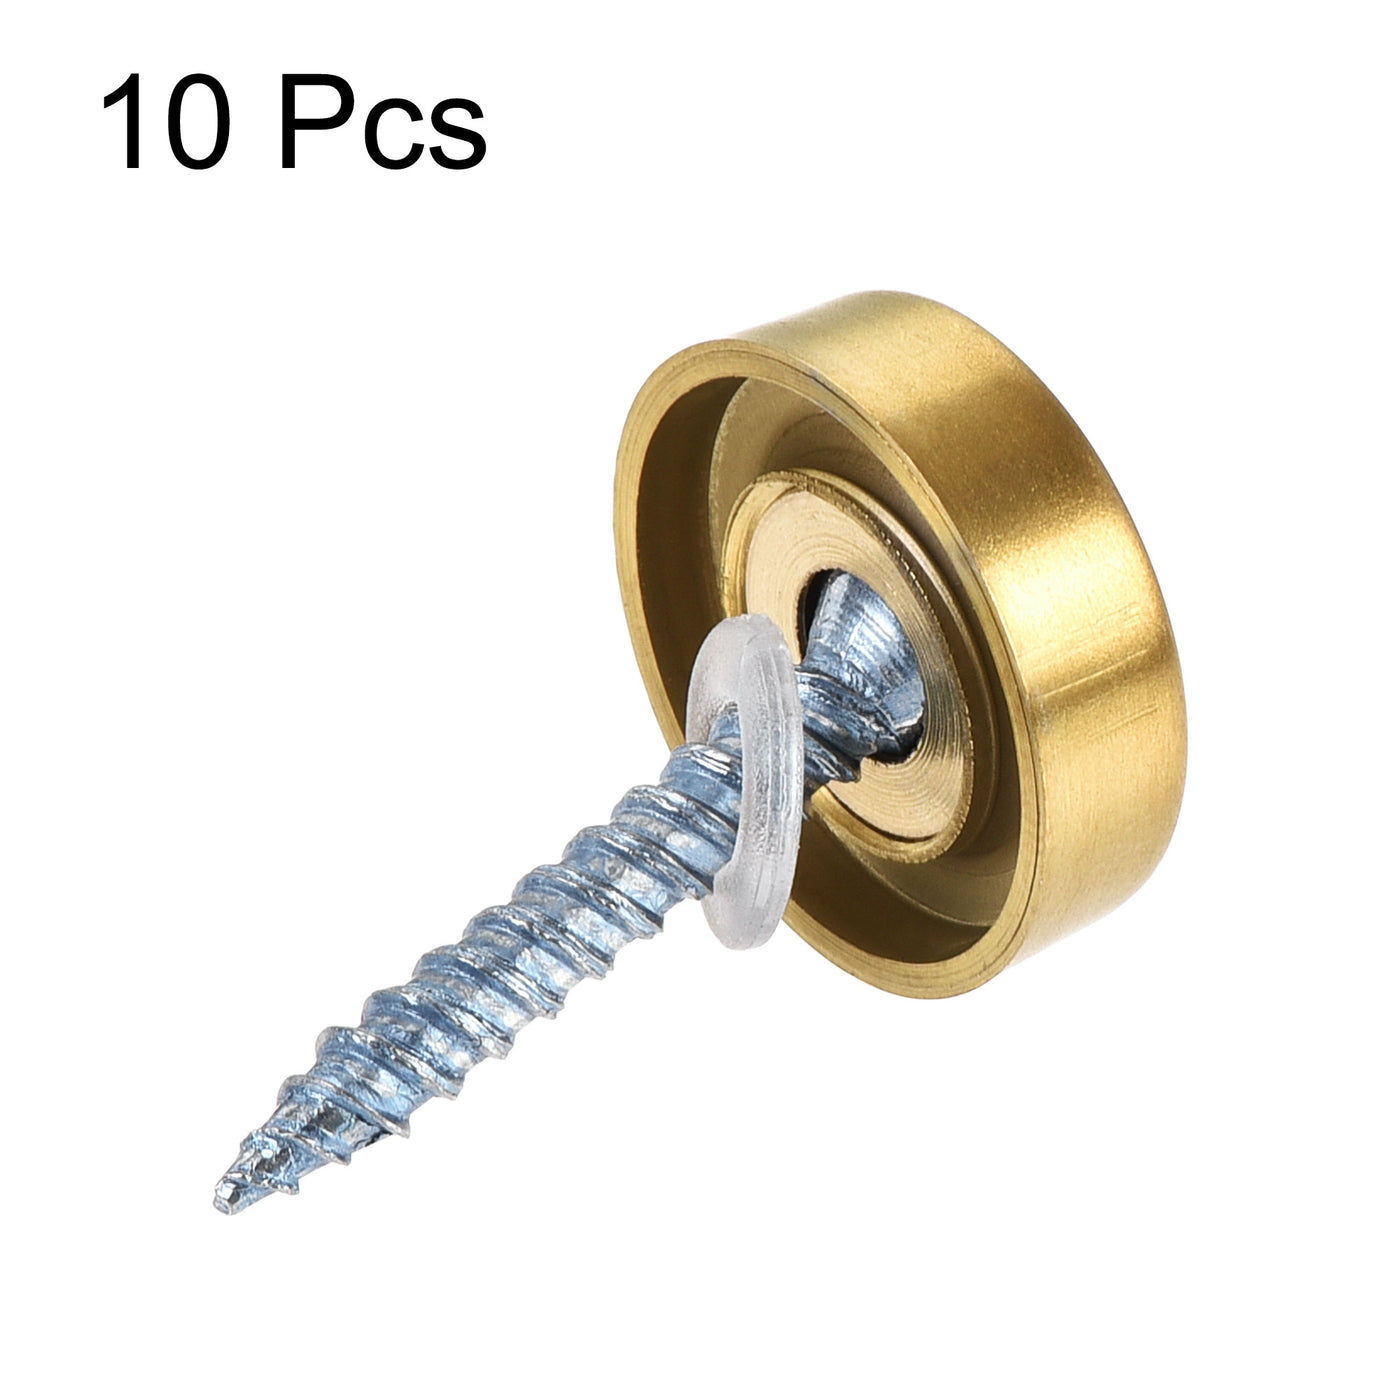 uxcell Uxcell Mirror Screws, 16mm/0.63", 10pcs Decorative Cap Fasteners Cover Nails, Wire Drawing, Gold Tone 304 Stainless Steel